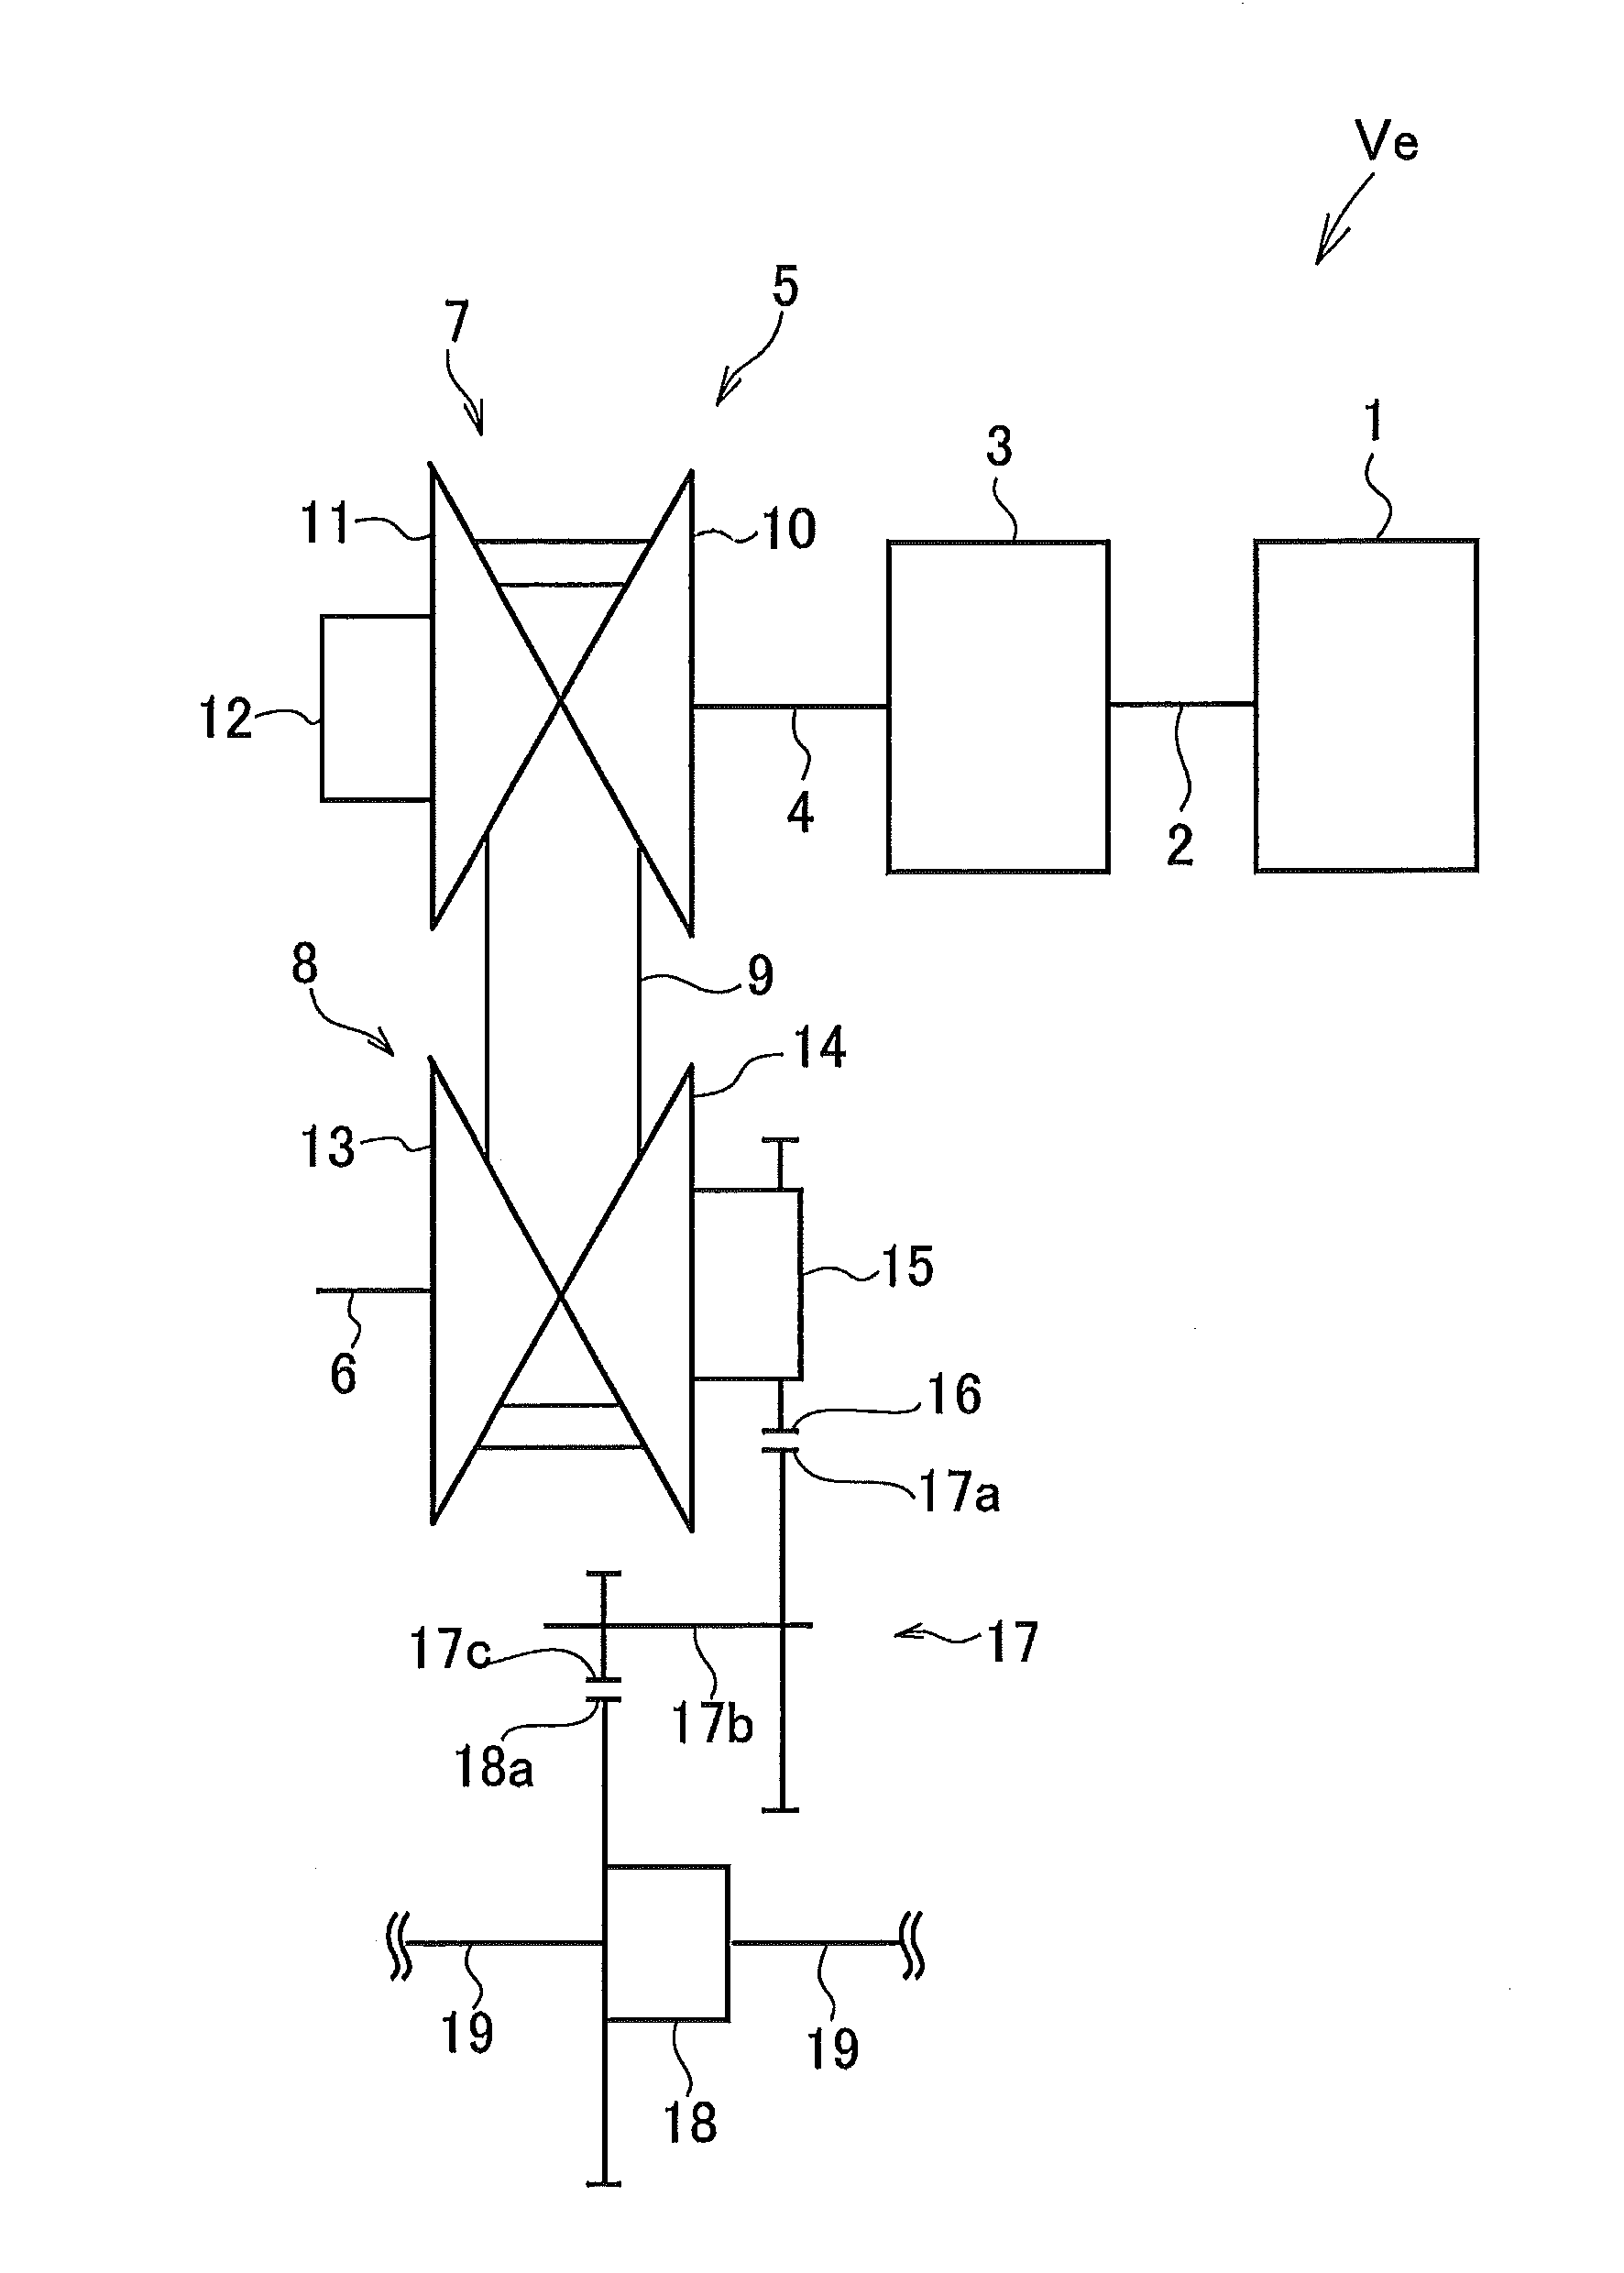 Belt-driven continuously variable transmission